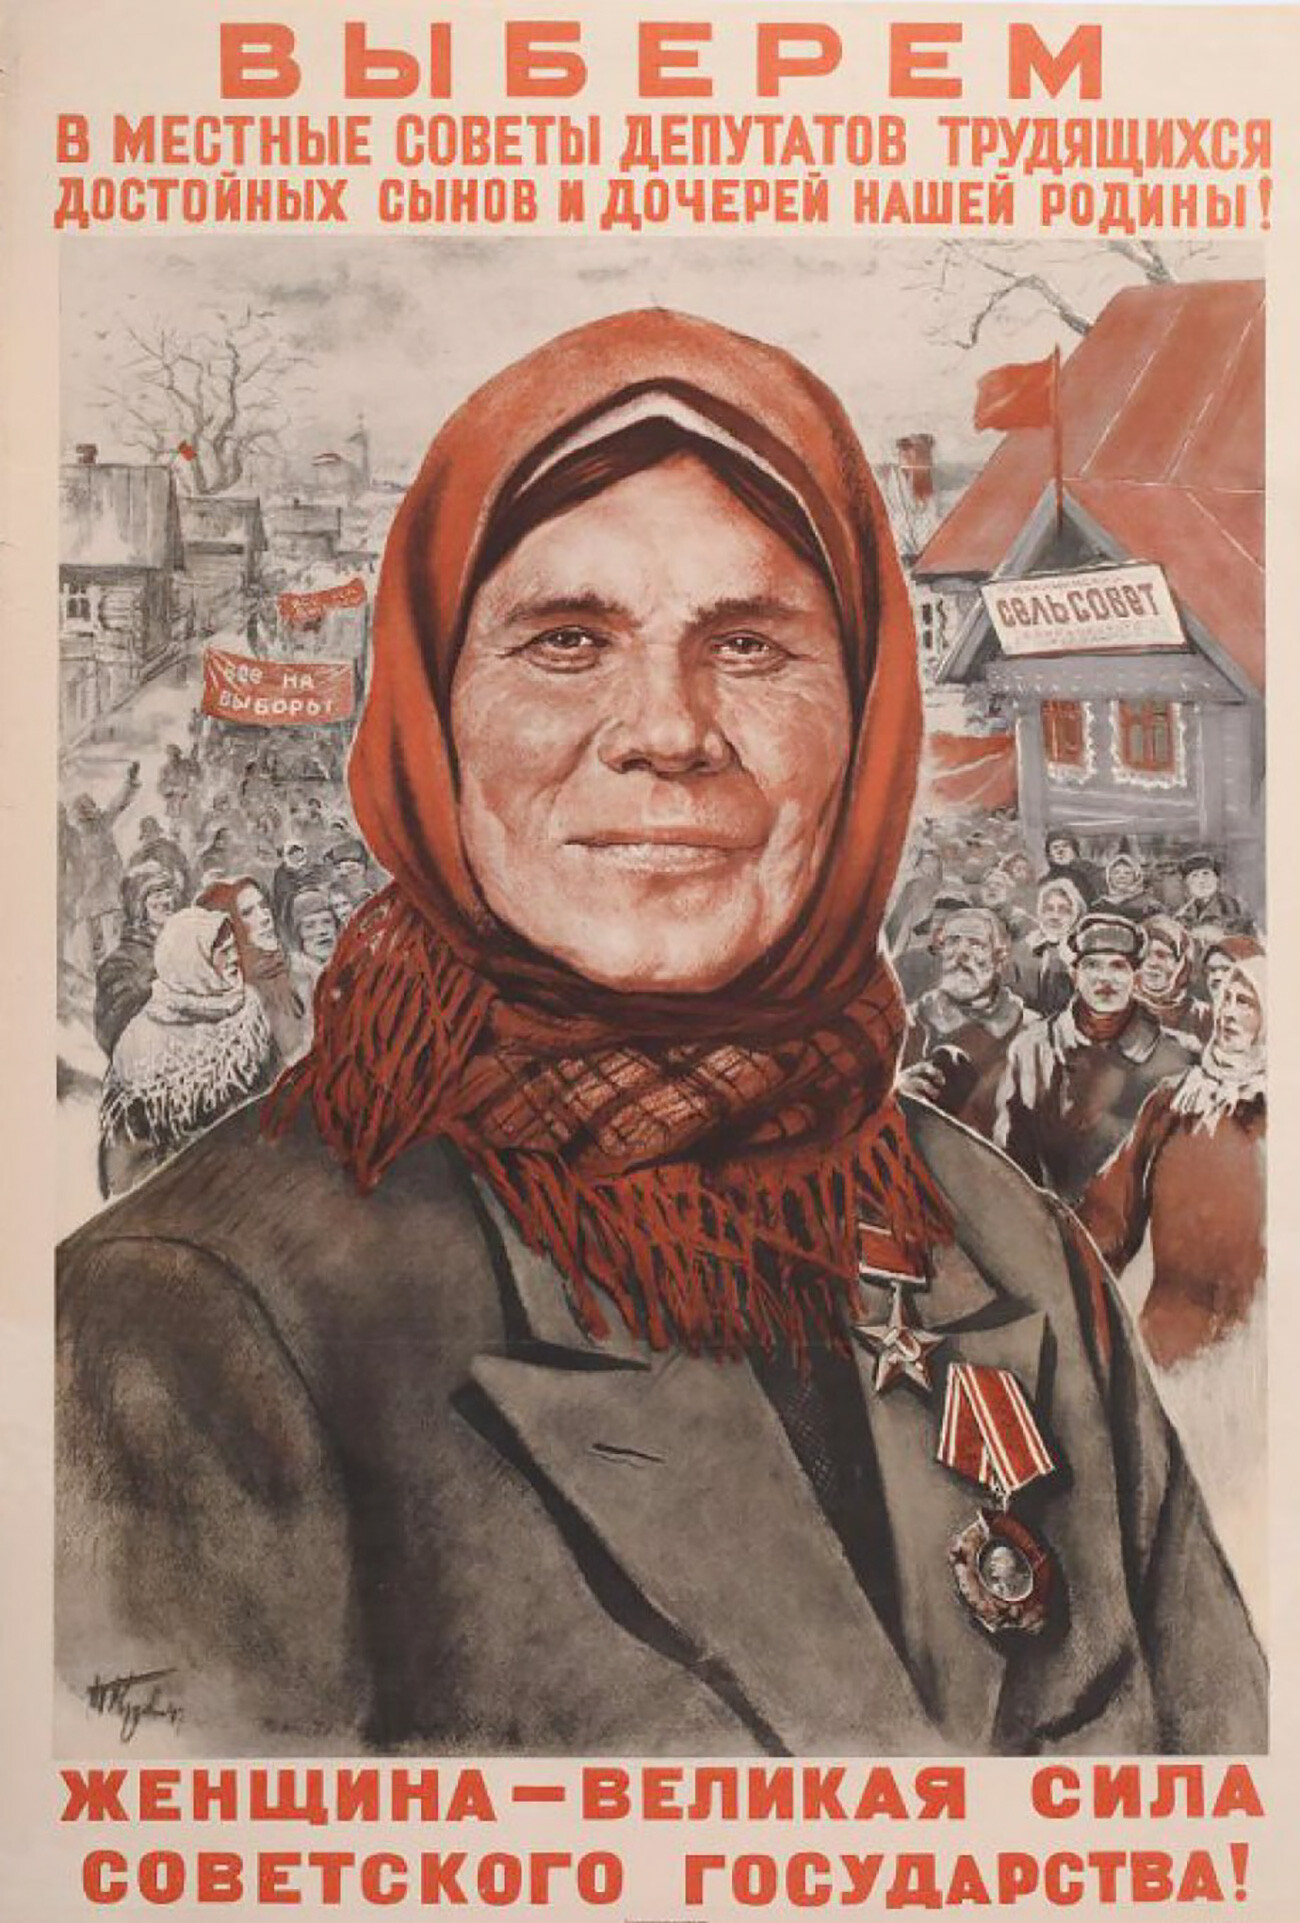 “Woman is the great power of the Soviet state! Vote for the worthy deputes!”